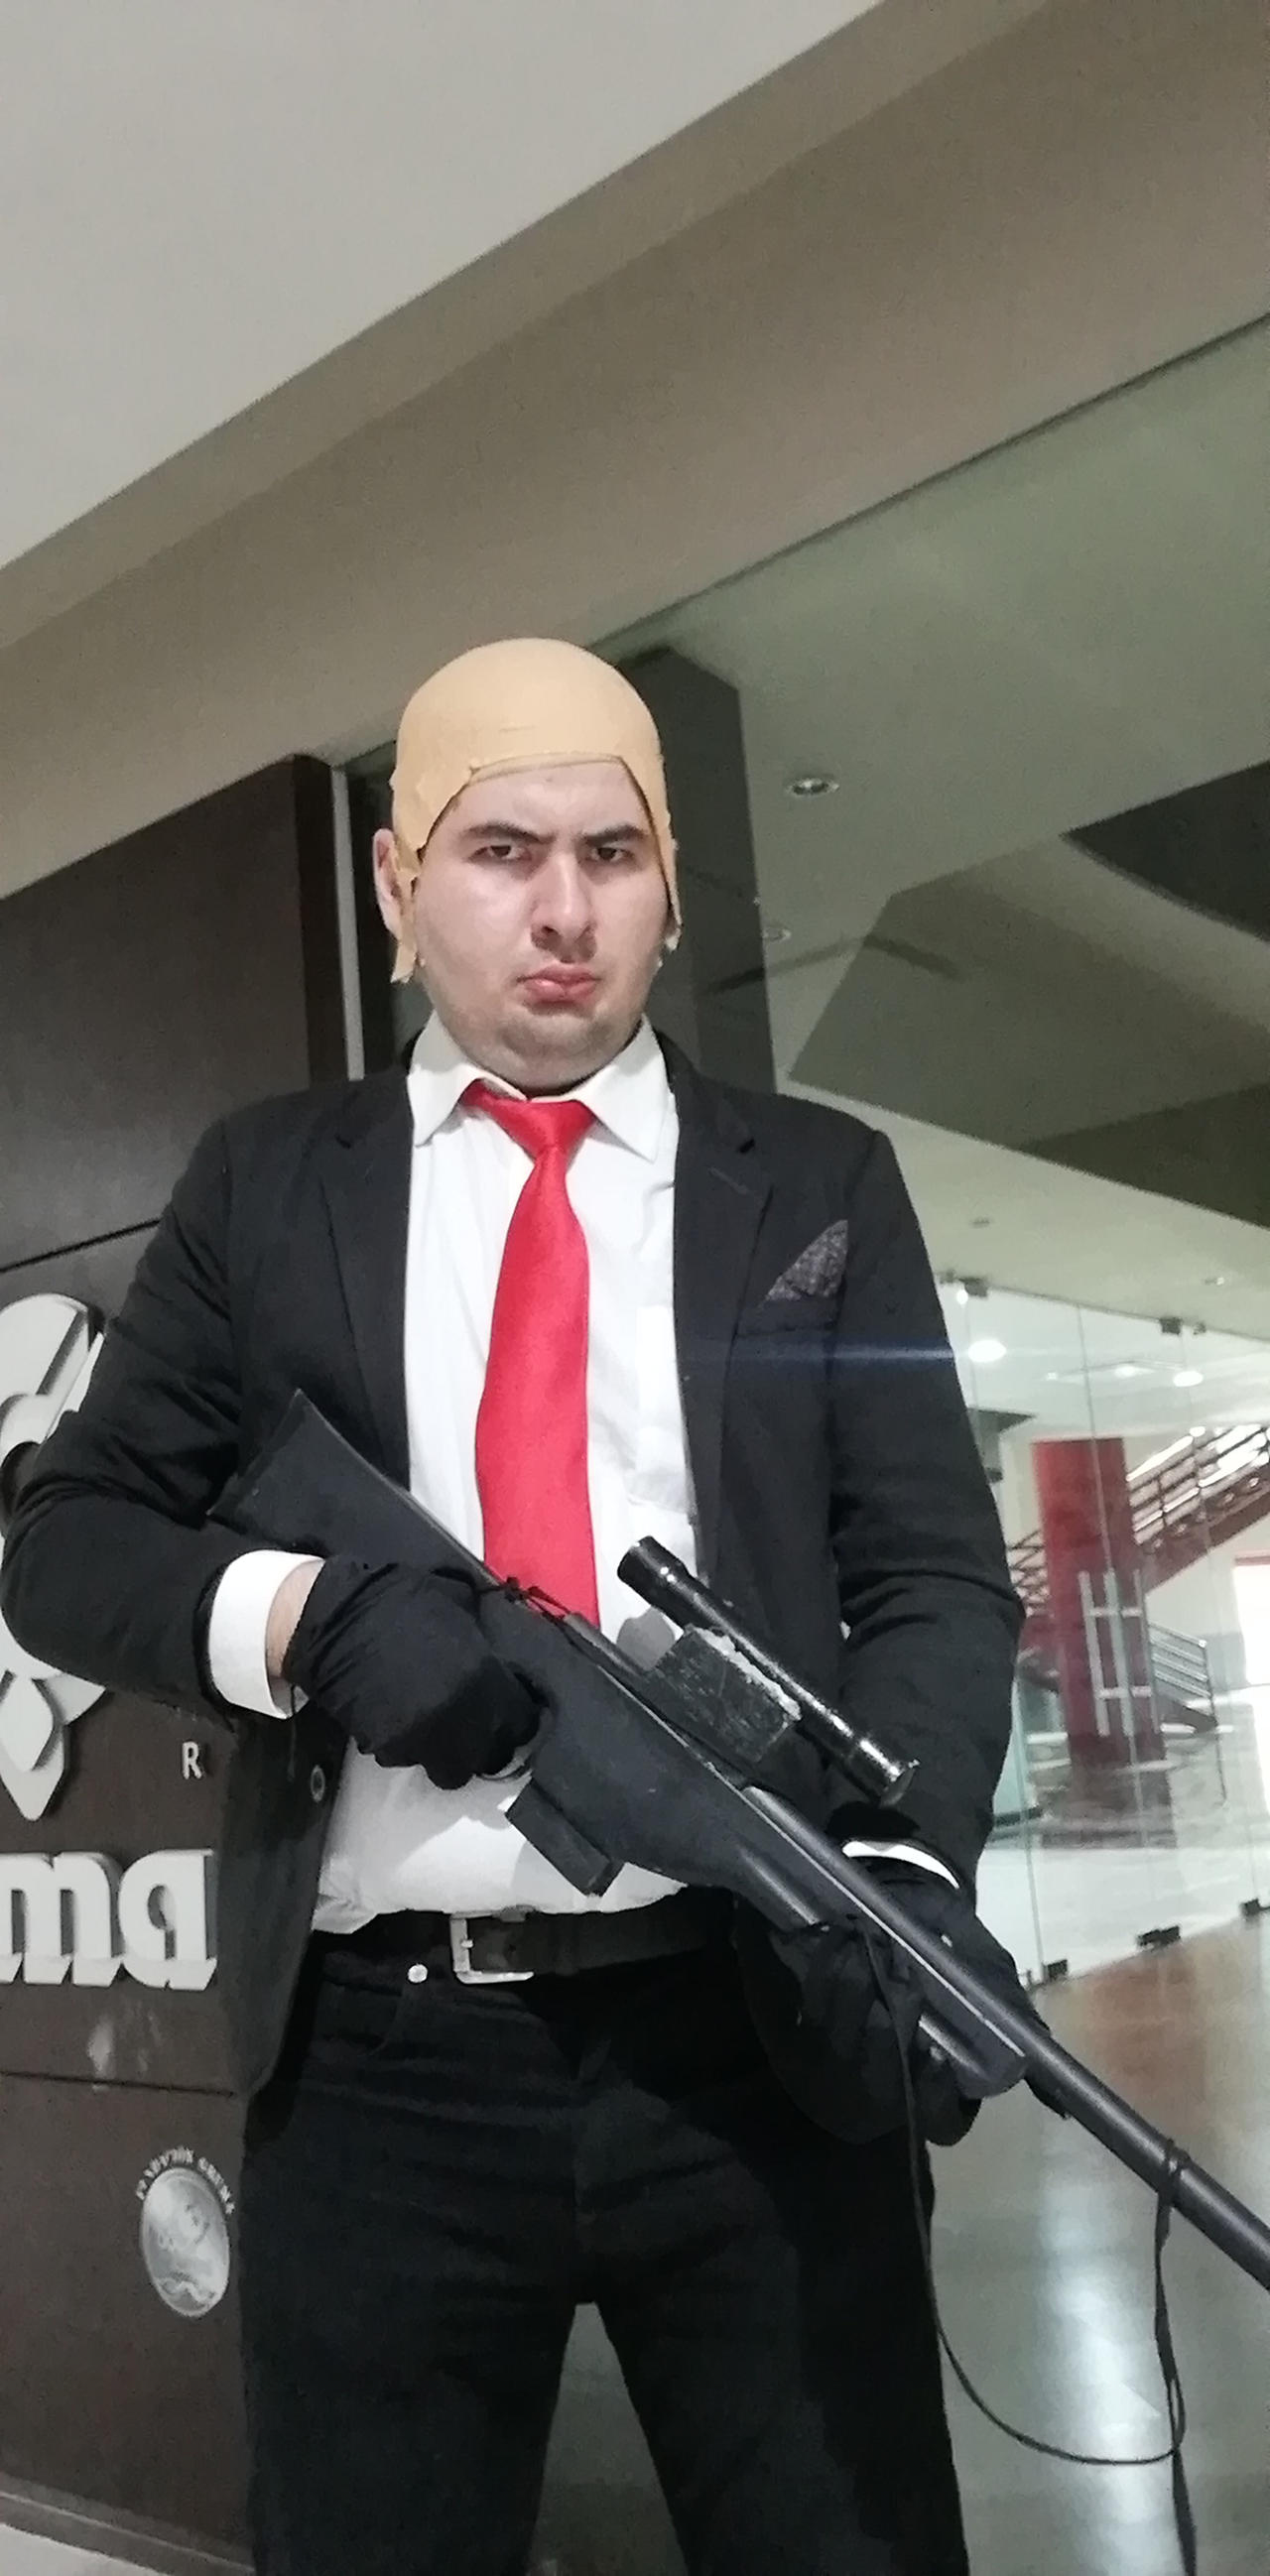 Agent 47 Cosplay 03 By Brandonale On Deviantart